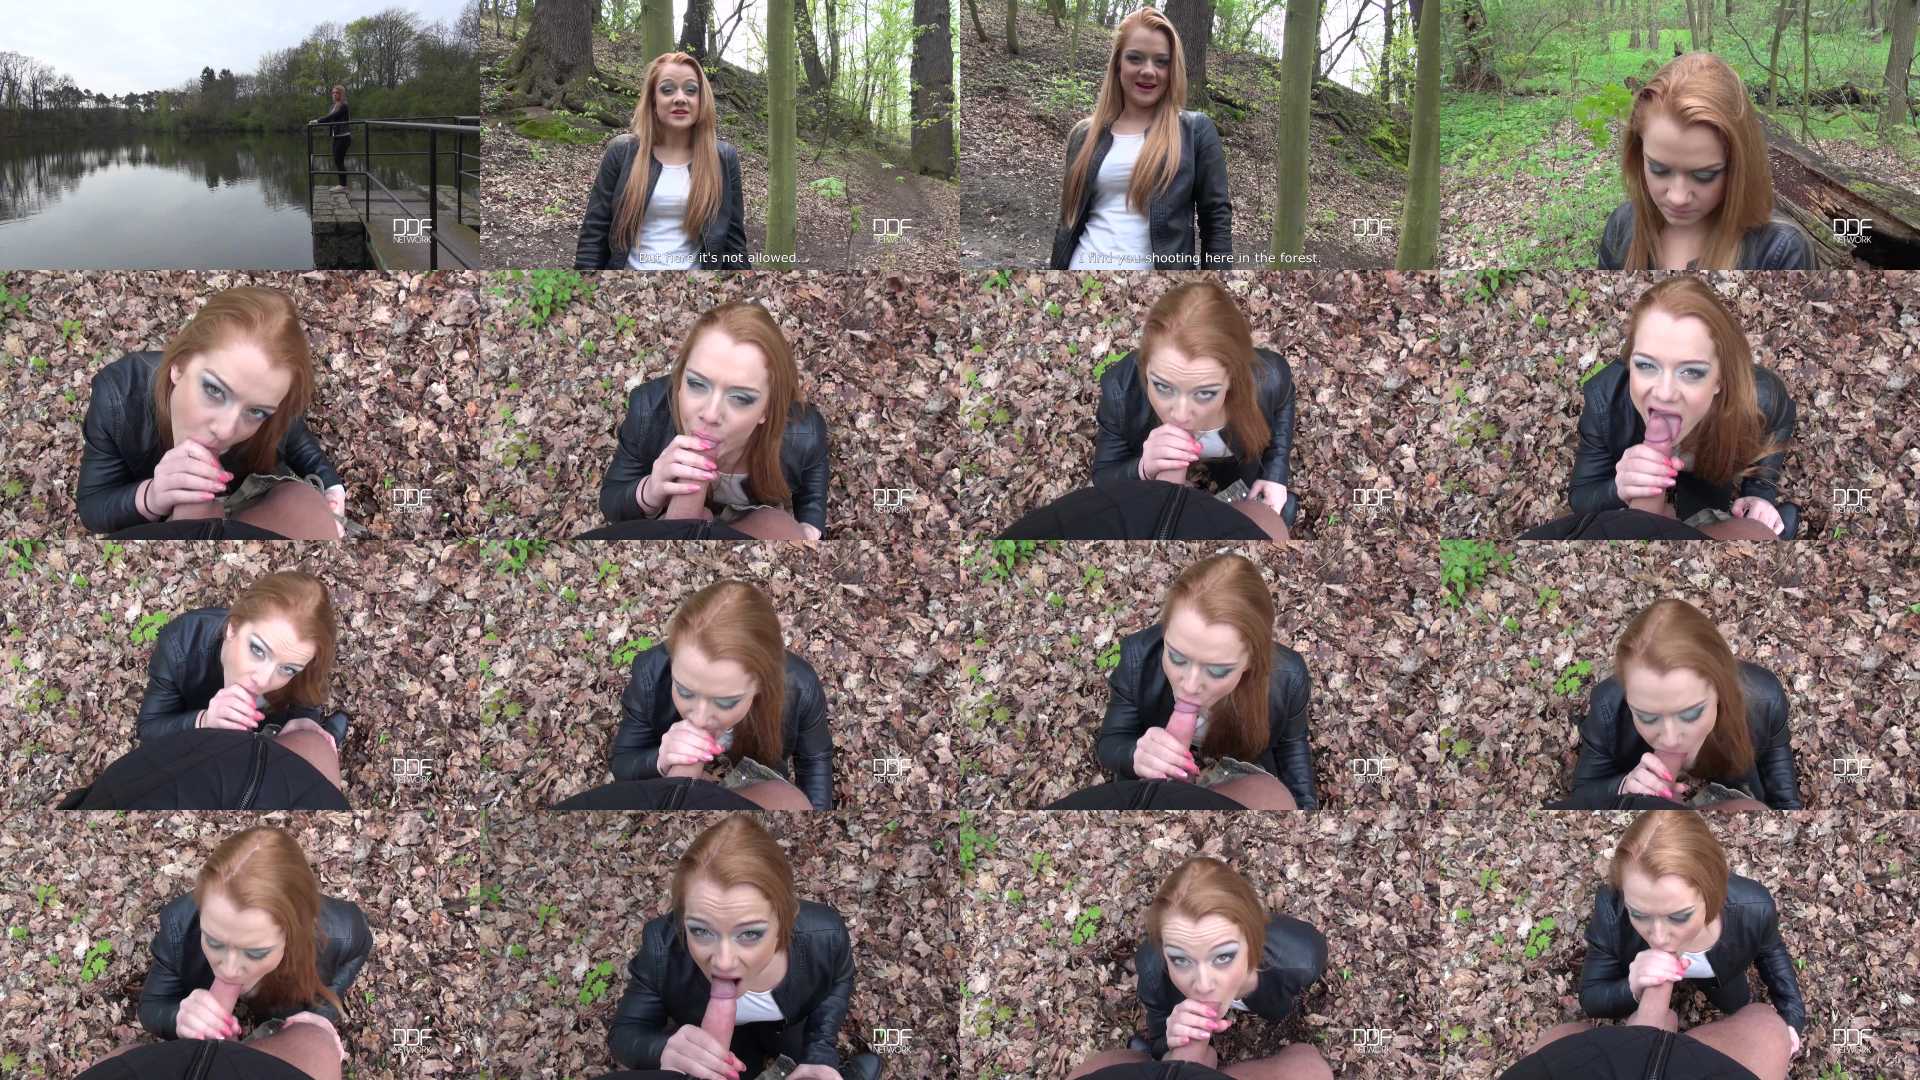 Alex Ginger in Wild Proposal - A Cock Sucking Agreement In The Forest